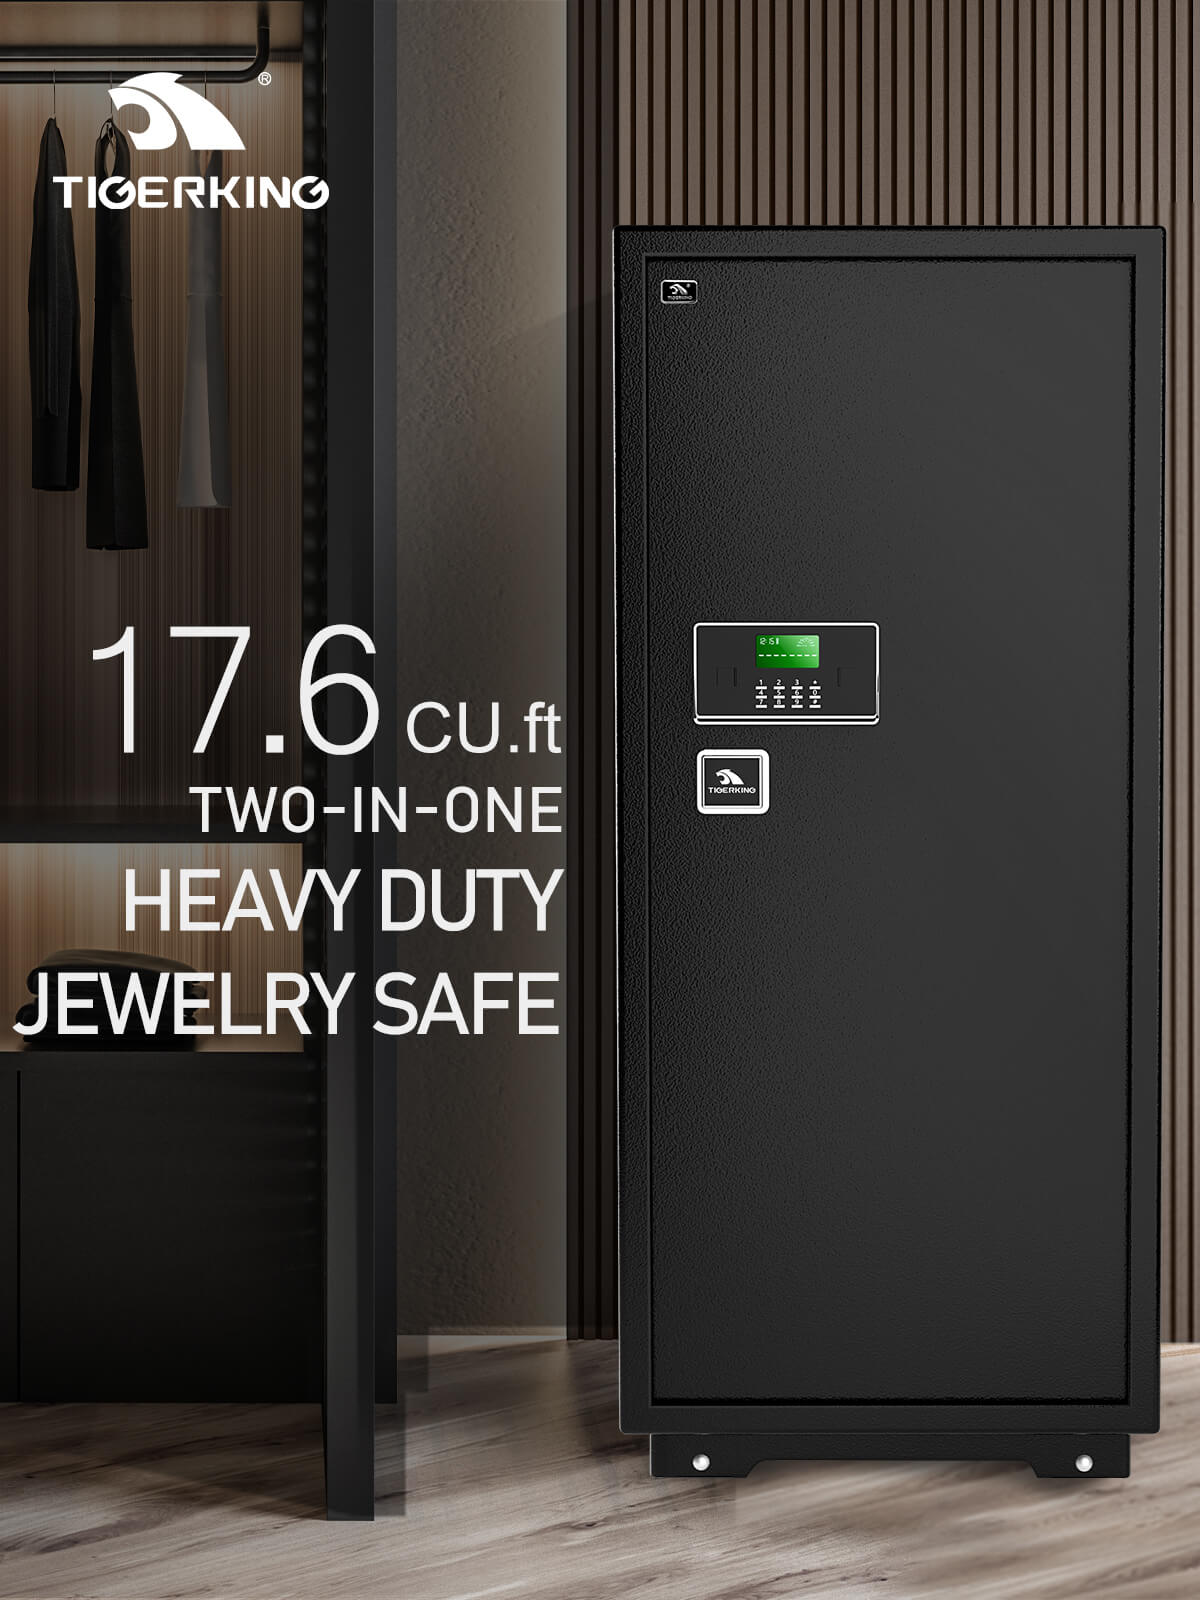 TIGERKING Extra Large All in 1 Gun Safe + Jewelry Safe Heavy Duty Safe Box Home Safe Key Lock and Separate Lock Box Digital safe Black 17.6 Cubic Feet 150GJ